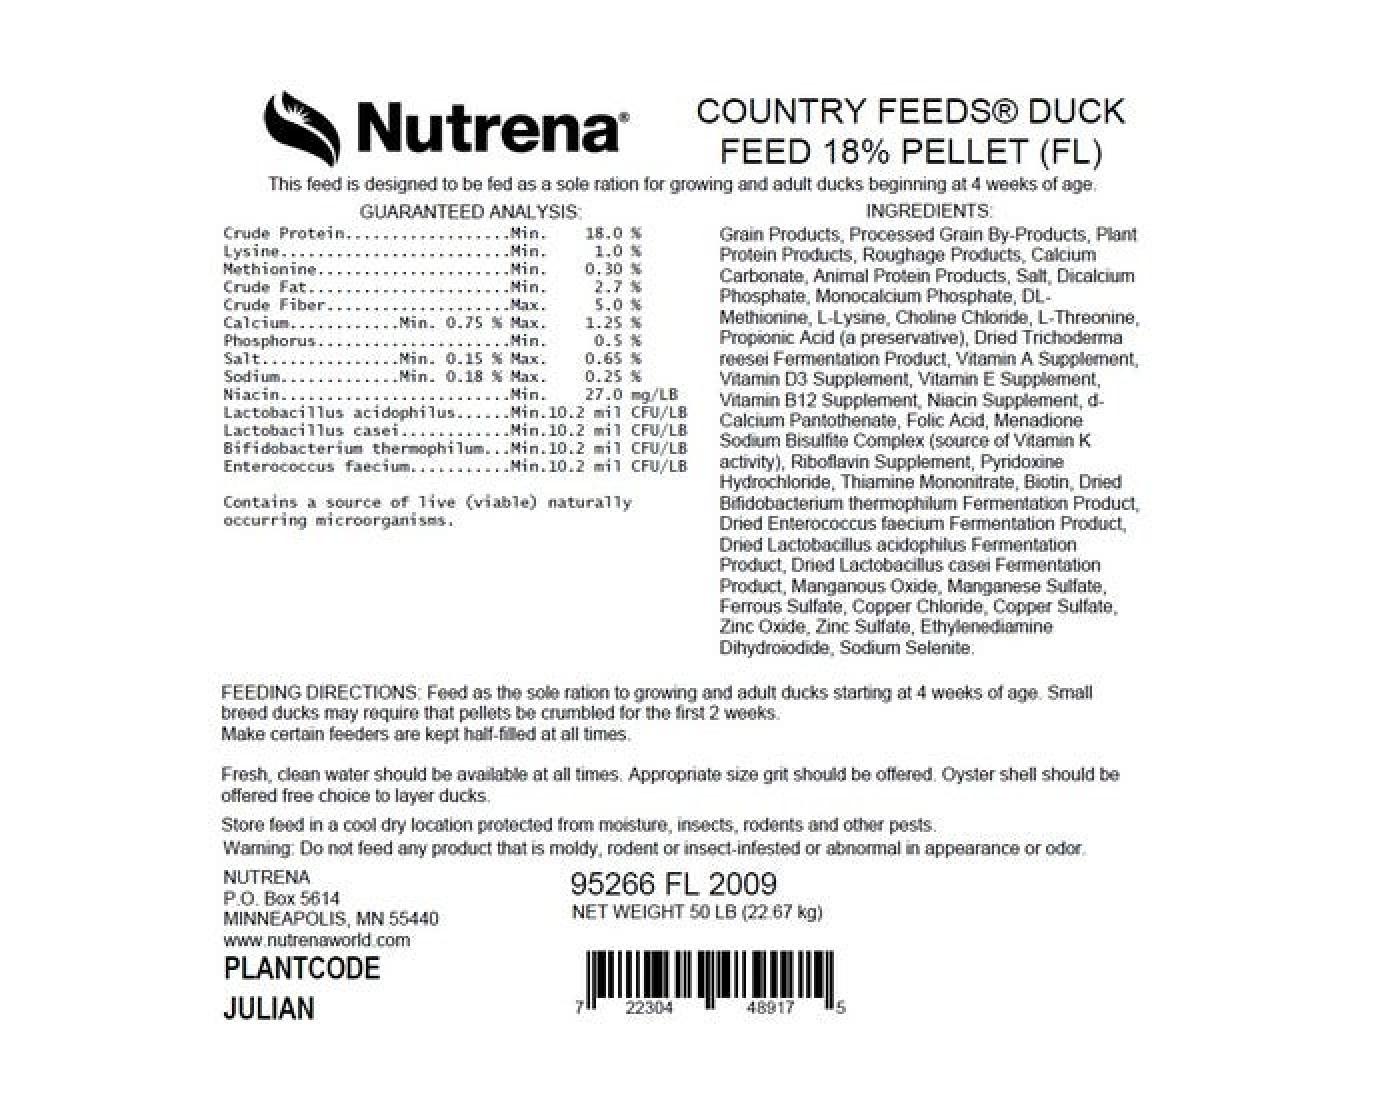  Nutrena Country Feeds 50 lb Duck 18% Pellets